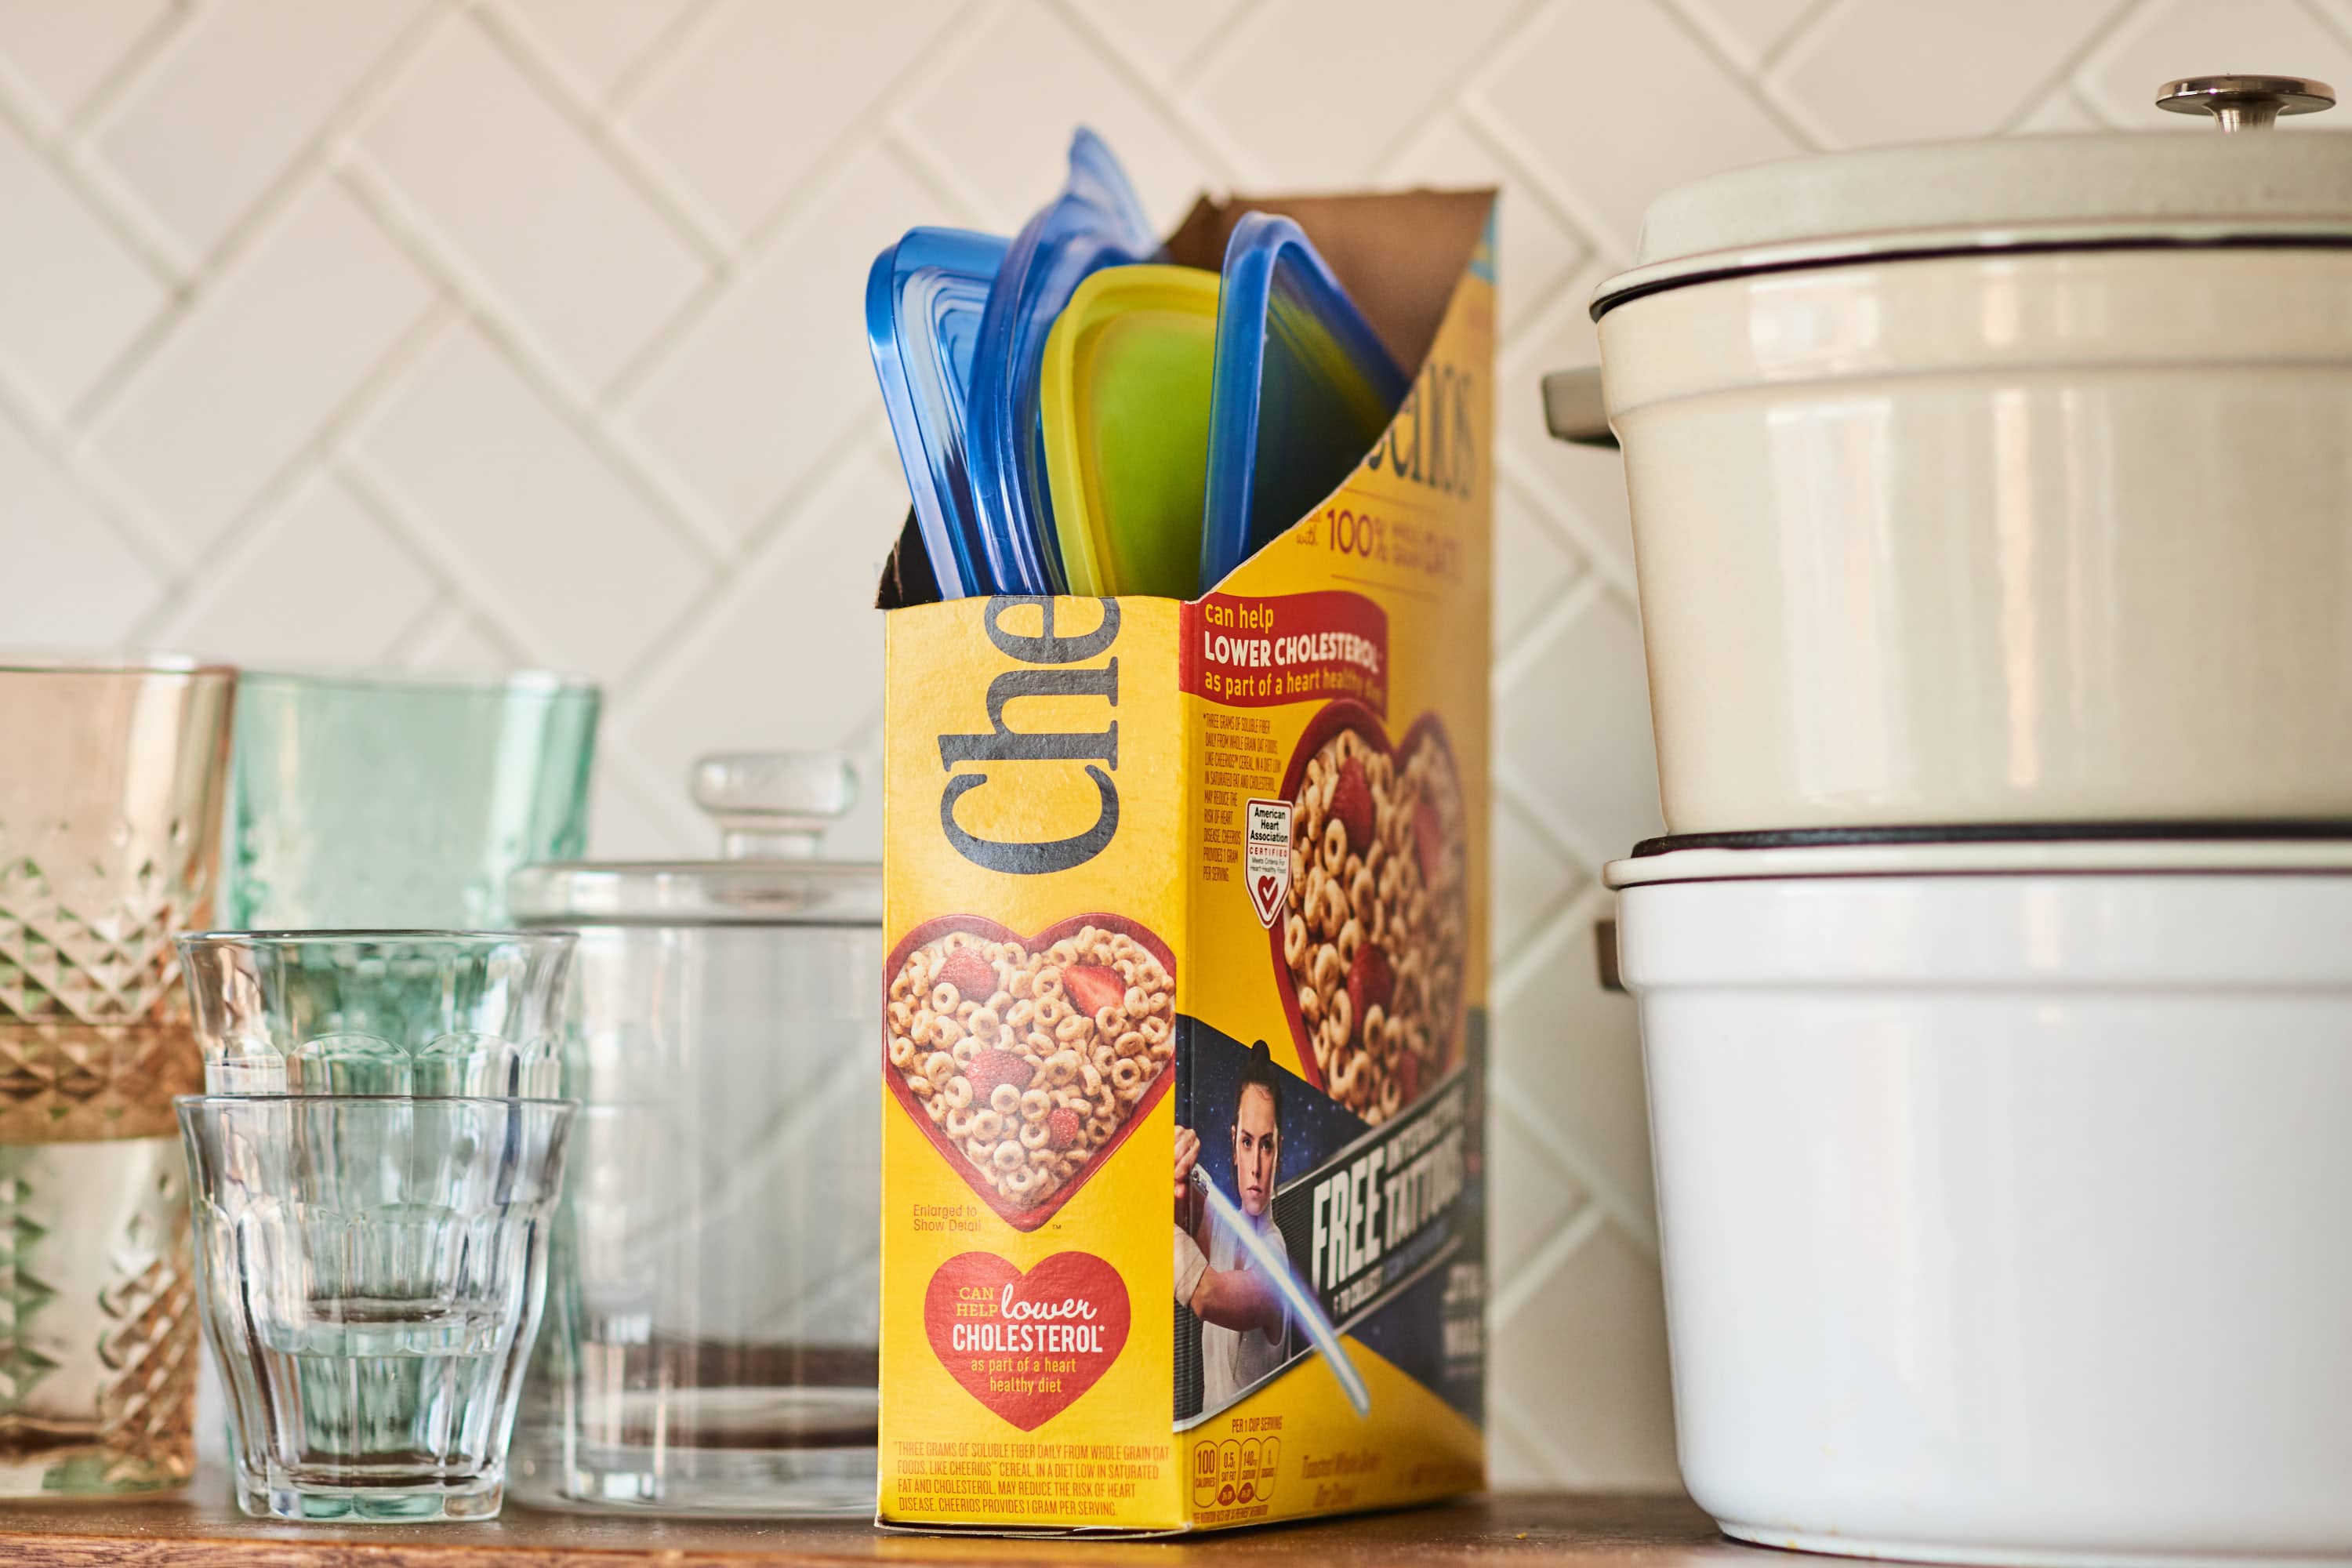 33 Best Storage Bins That Will Hold Just About Anything